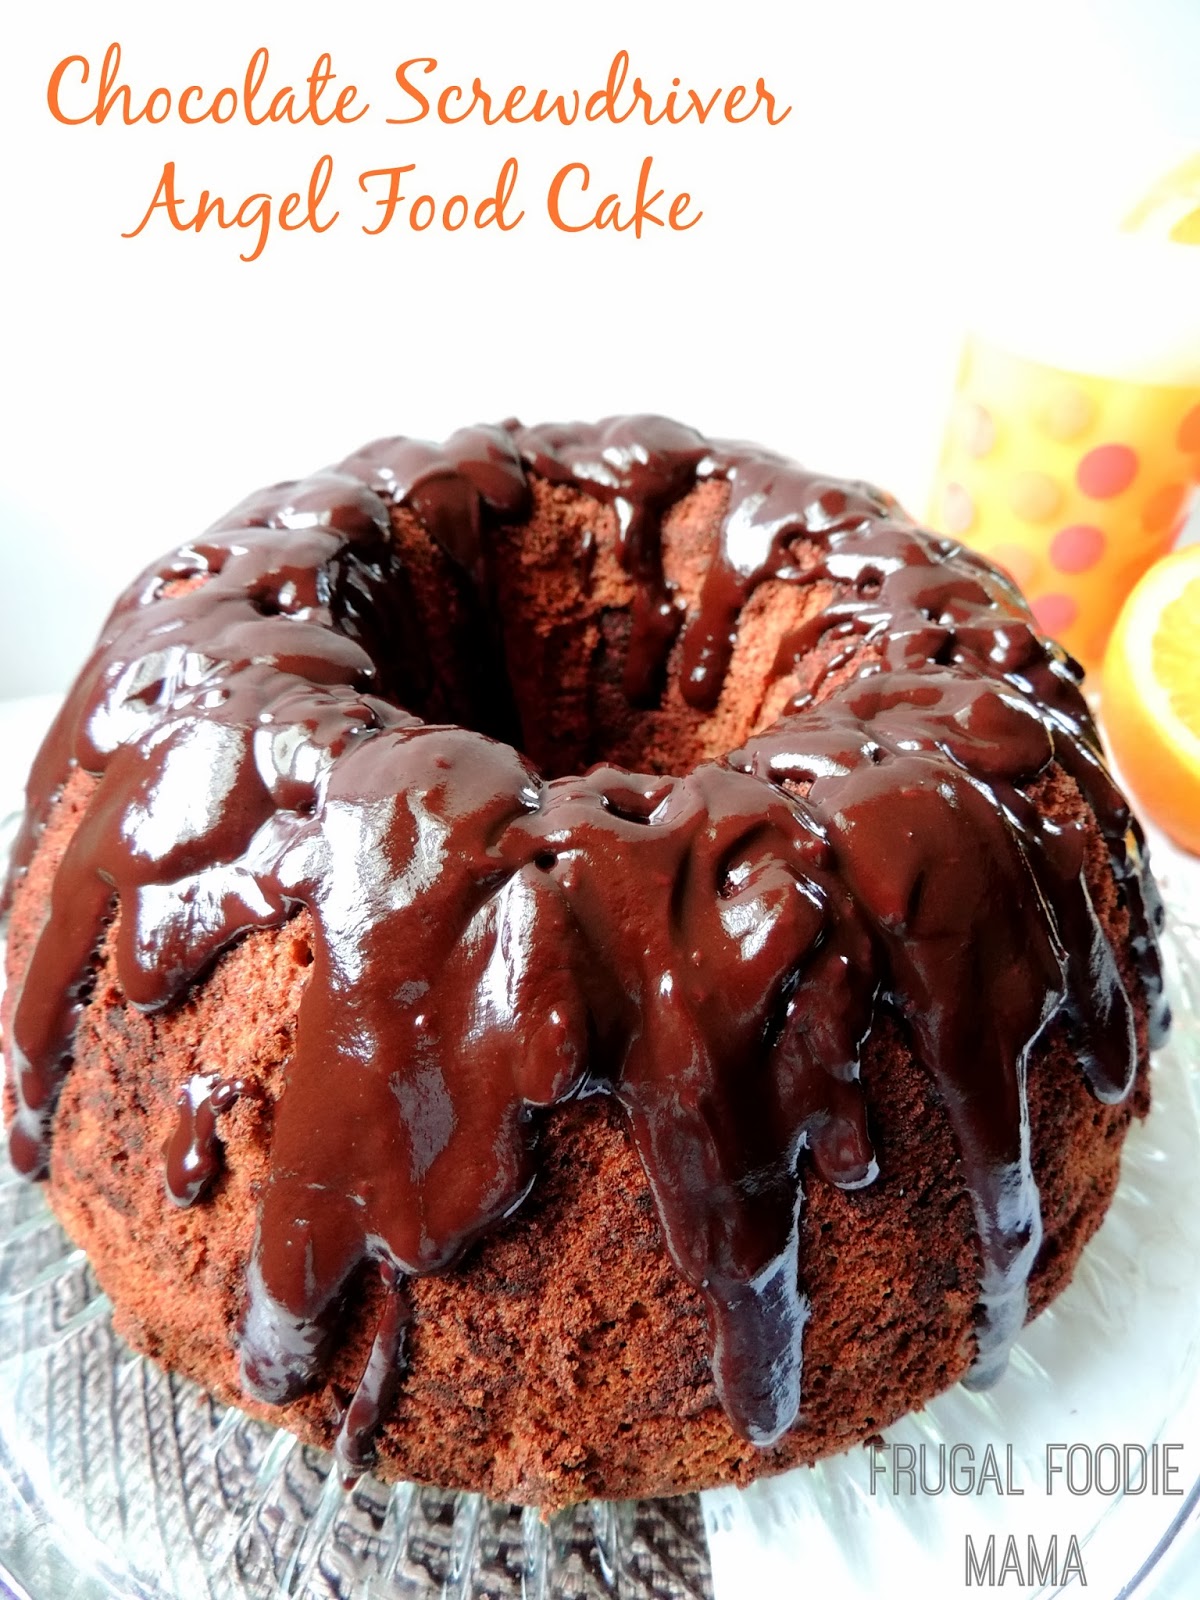 This Chocolate Screwdriver Angel Food Cake is a light, airy chocolaty orange angel food cake with a rich, gooey chocolate ganache glaze oozing down each slice of it.